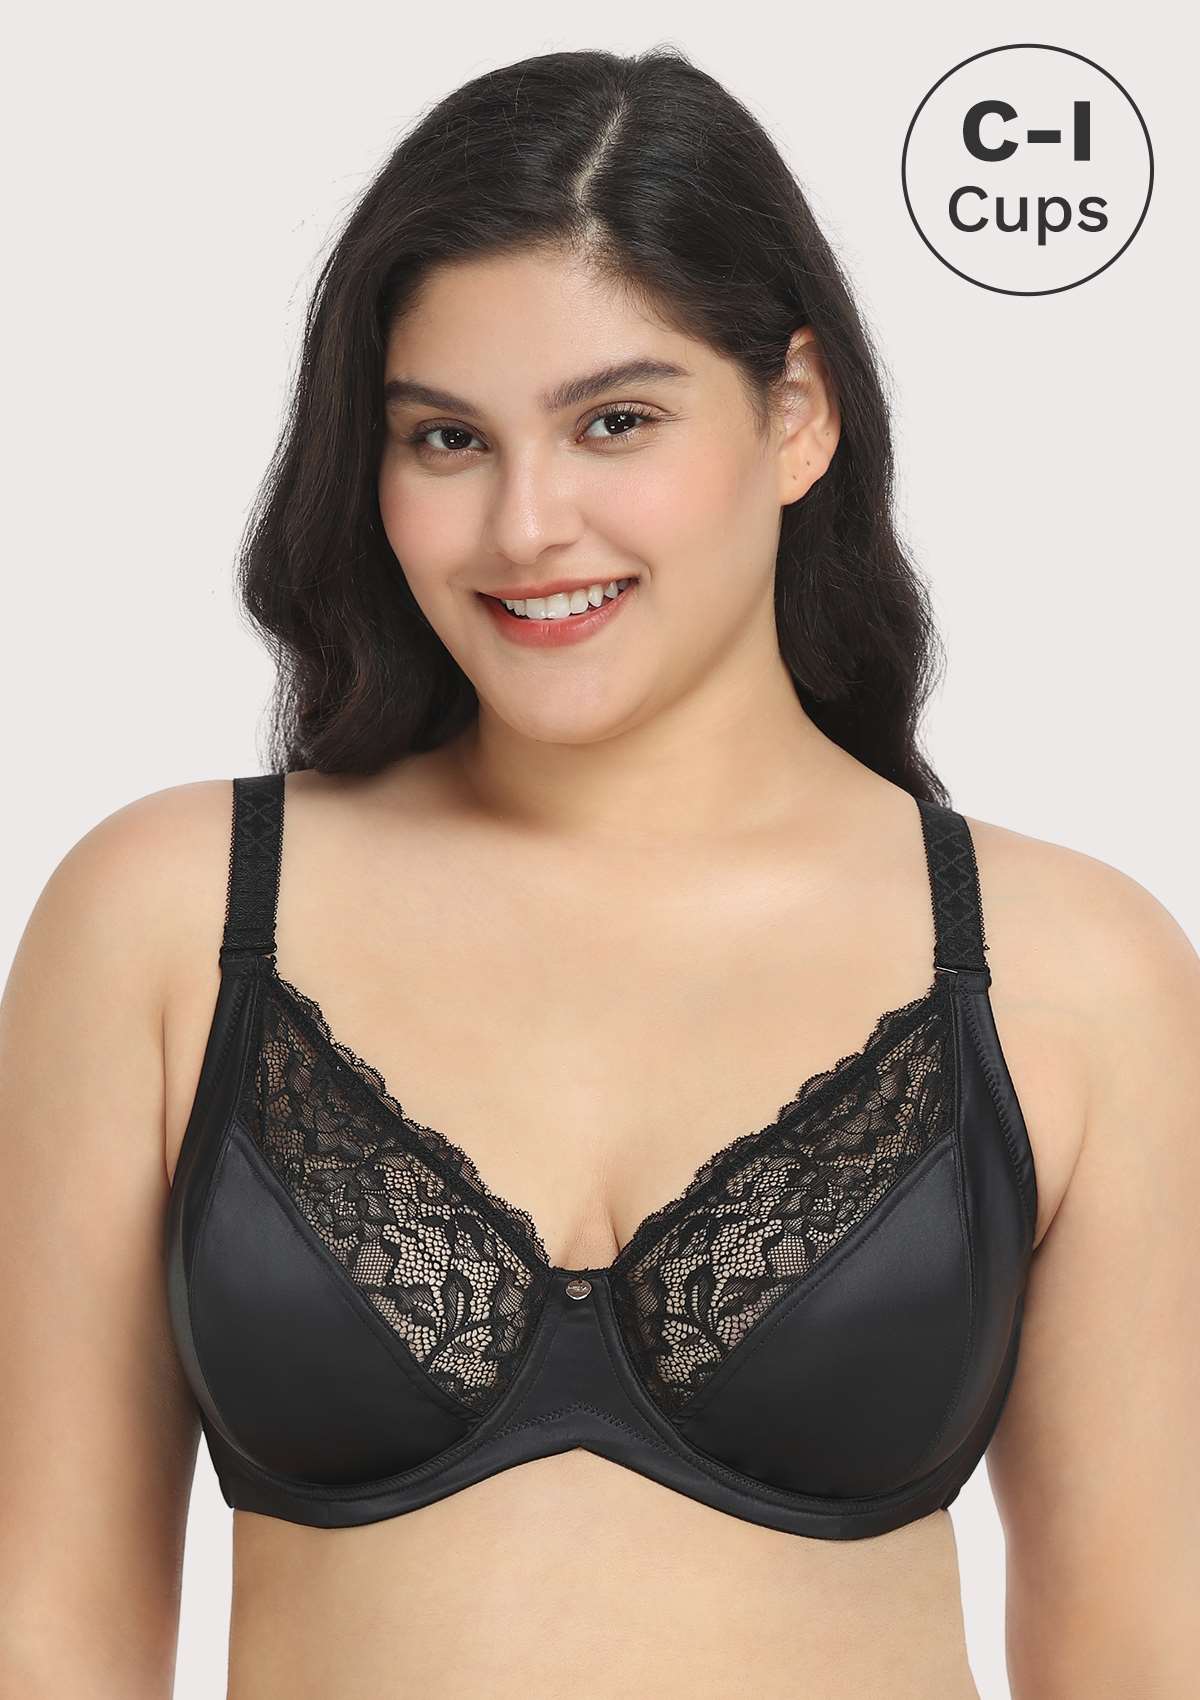 HSIA Foxy Satin Silky Full Coverage Underwire Bra With Floral Lace Trim - Black / 36 / H